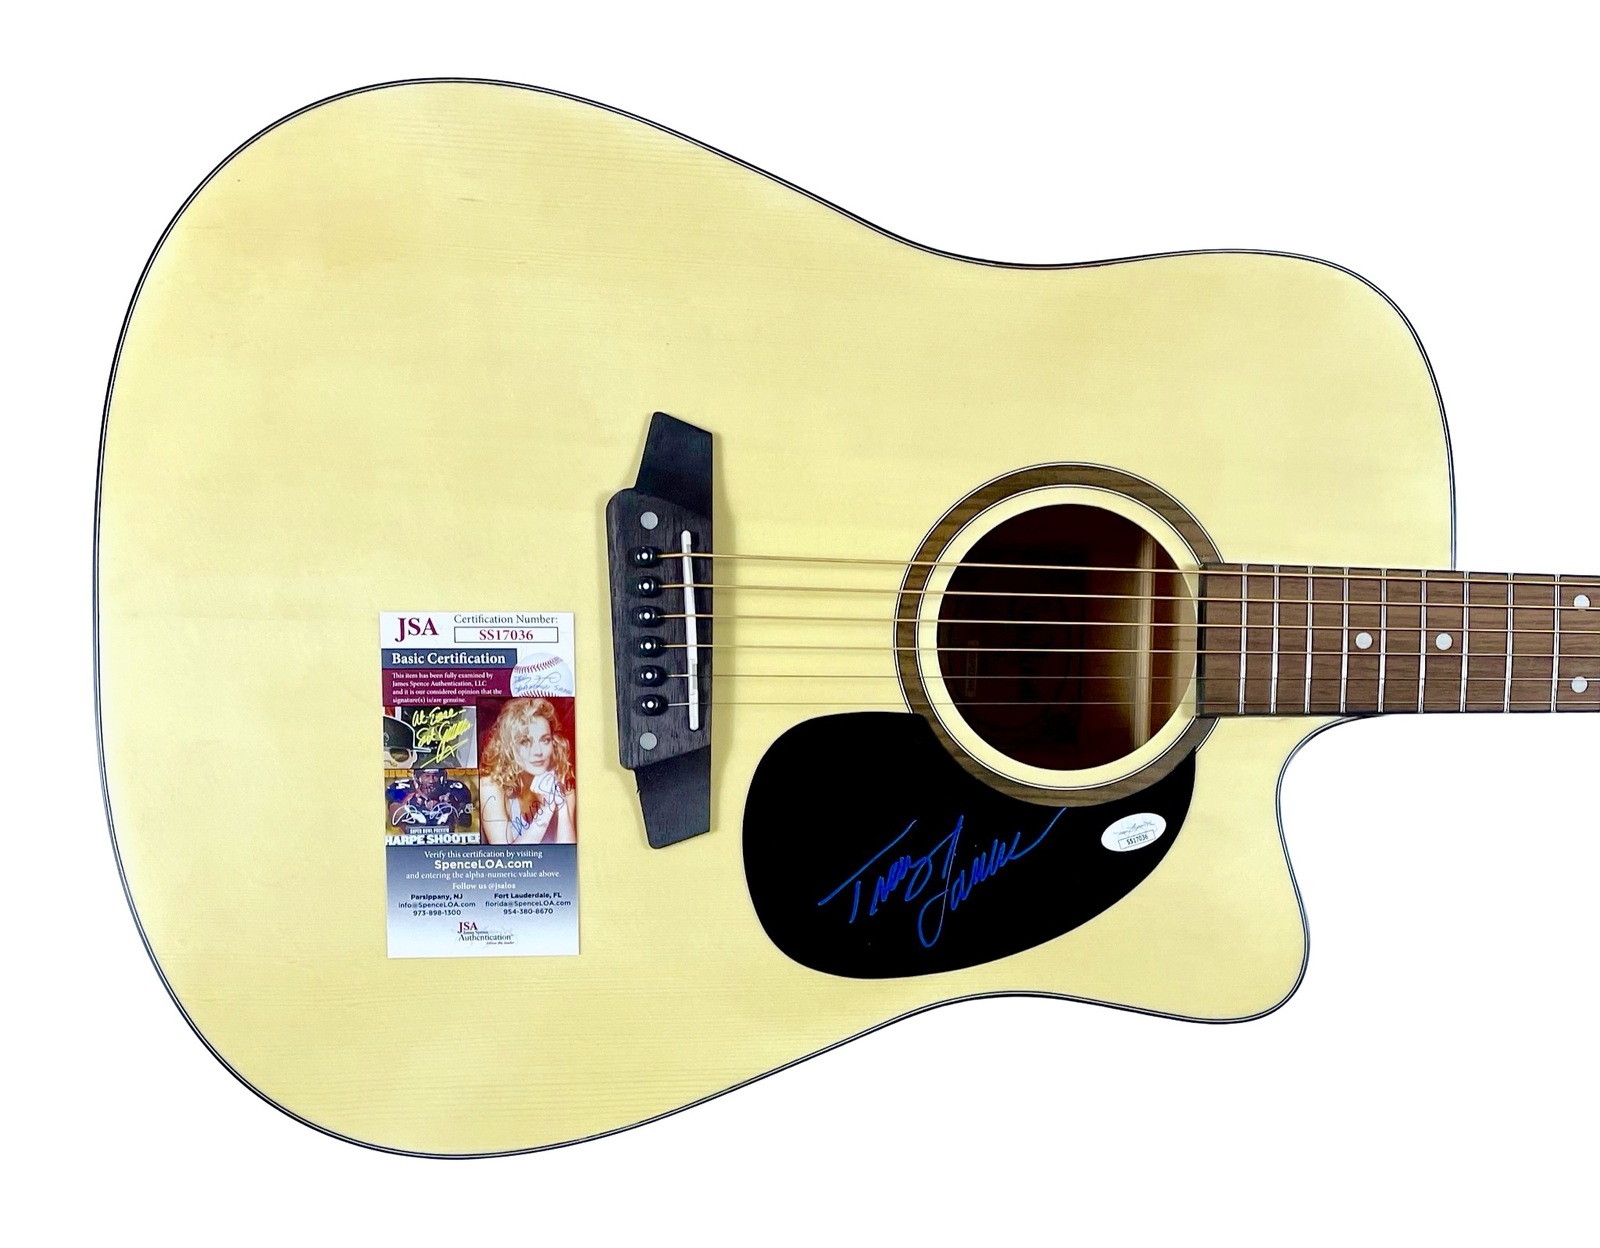 Primary image for TRACY LAWRENCE Autographed SIGNED ACOUSTIC/ELECTRIC GUITAR JSA Certified COUNTRY